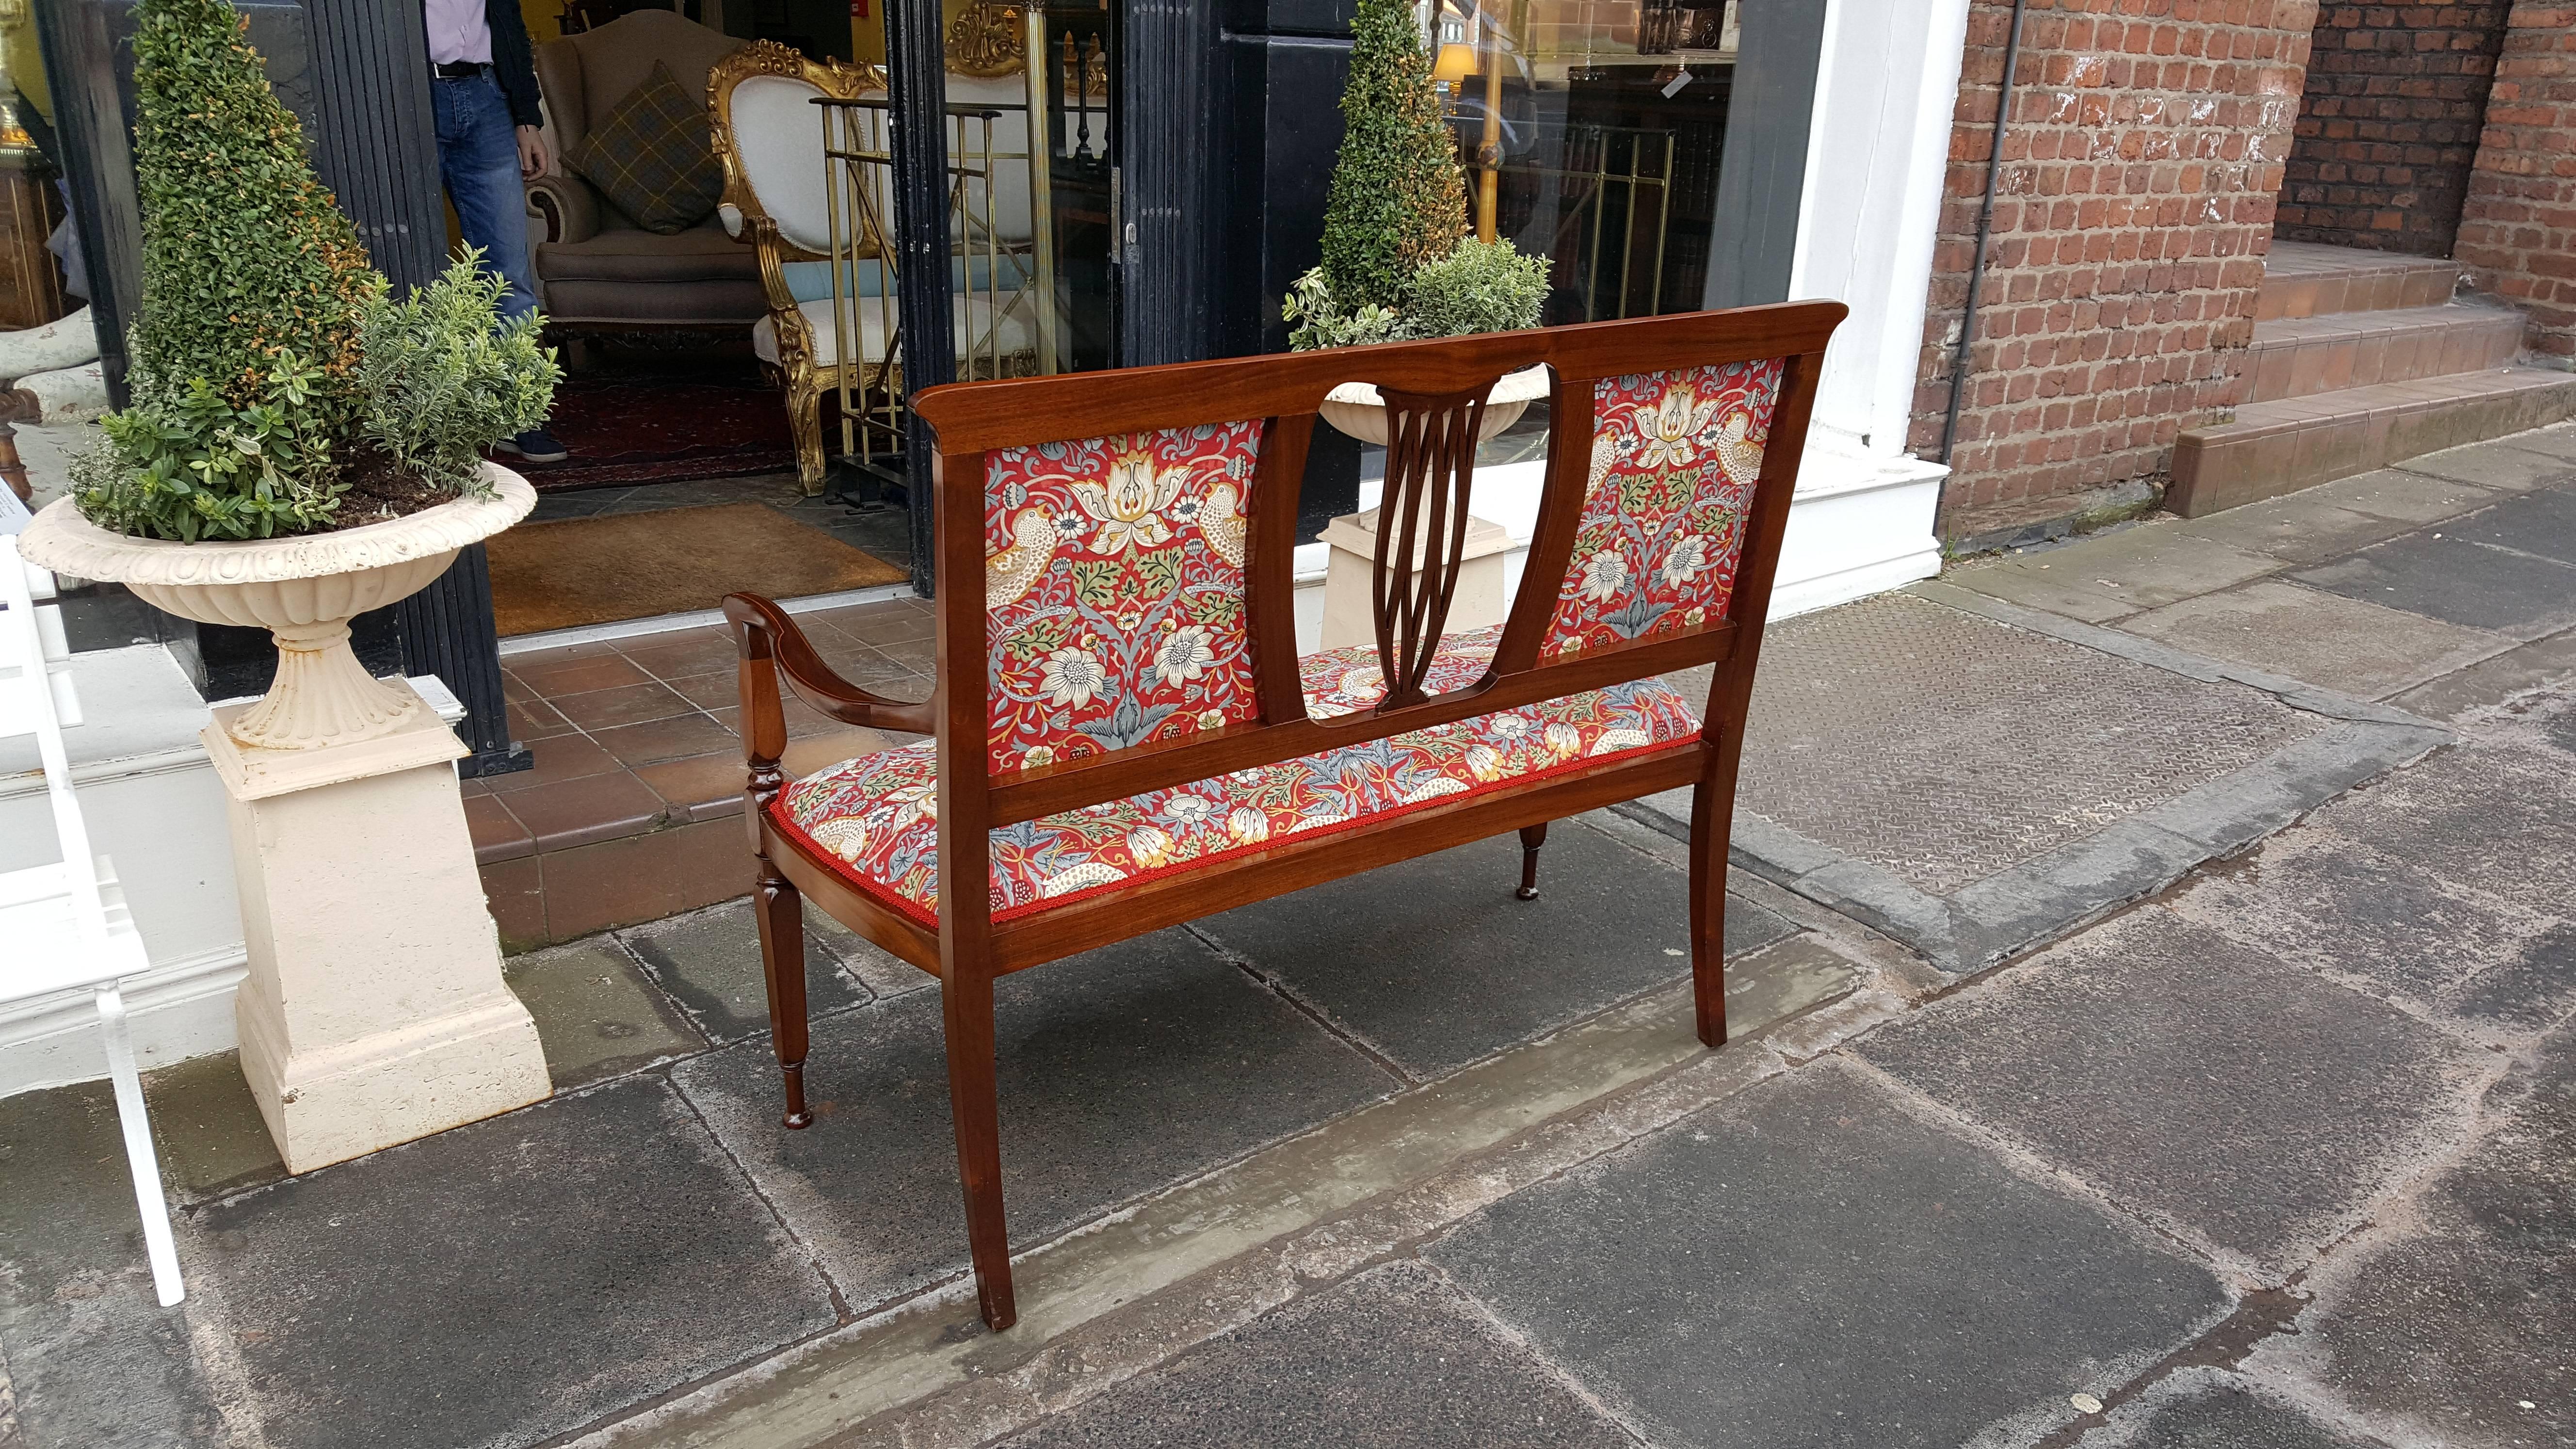 Upholstery Arts & Crafts Mahogany Two-Seat Settee